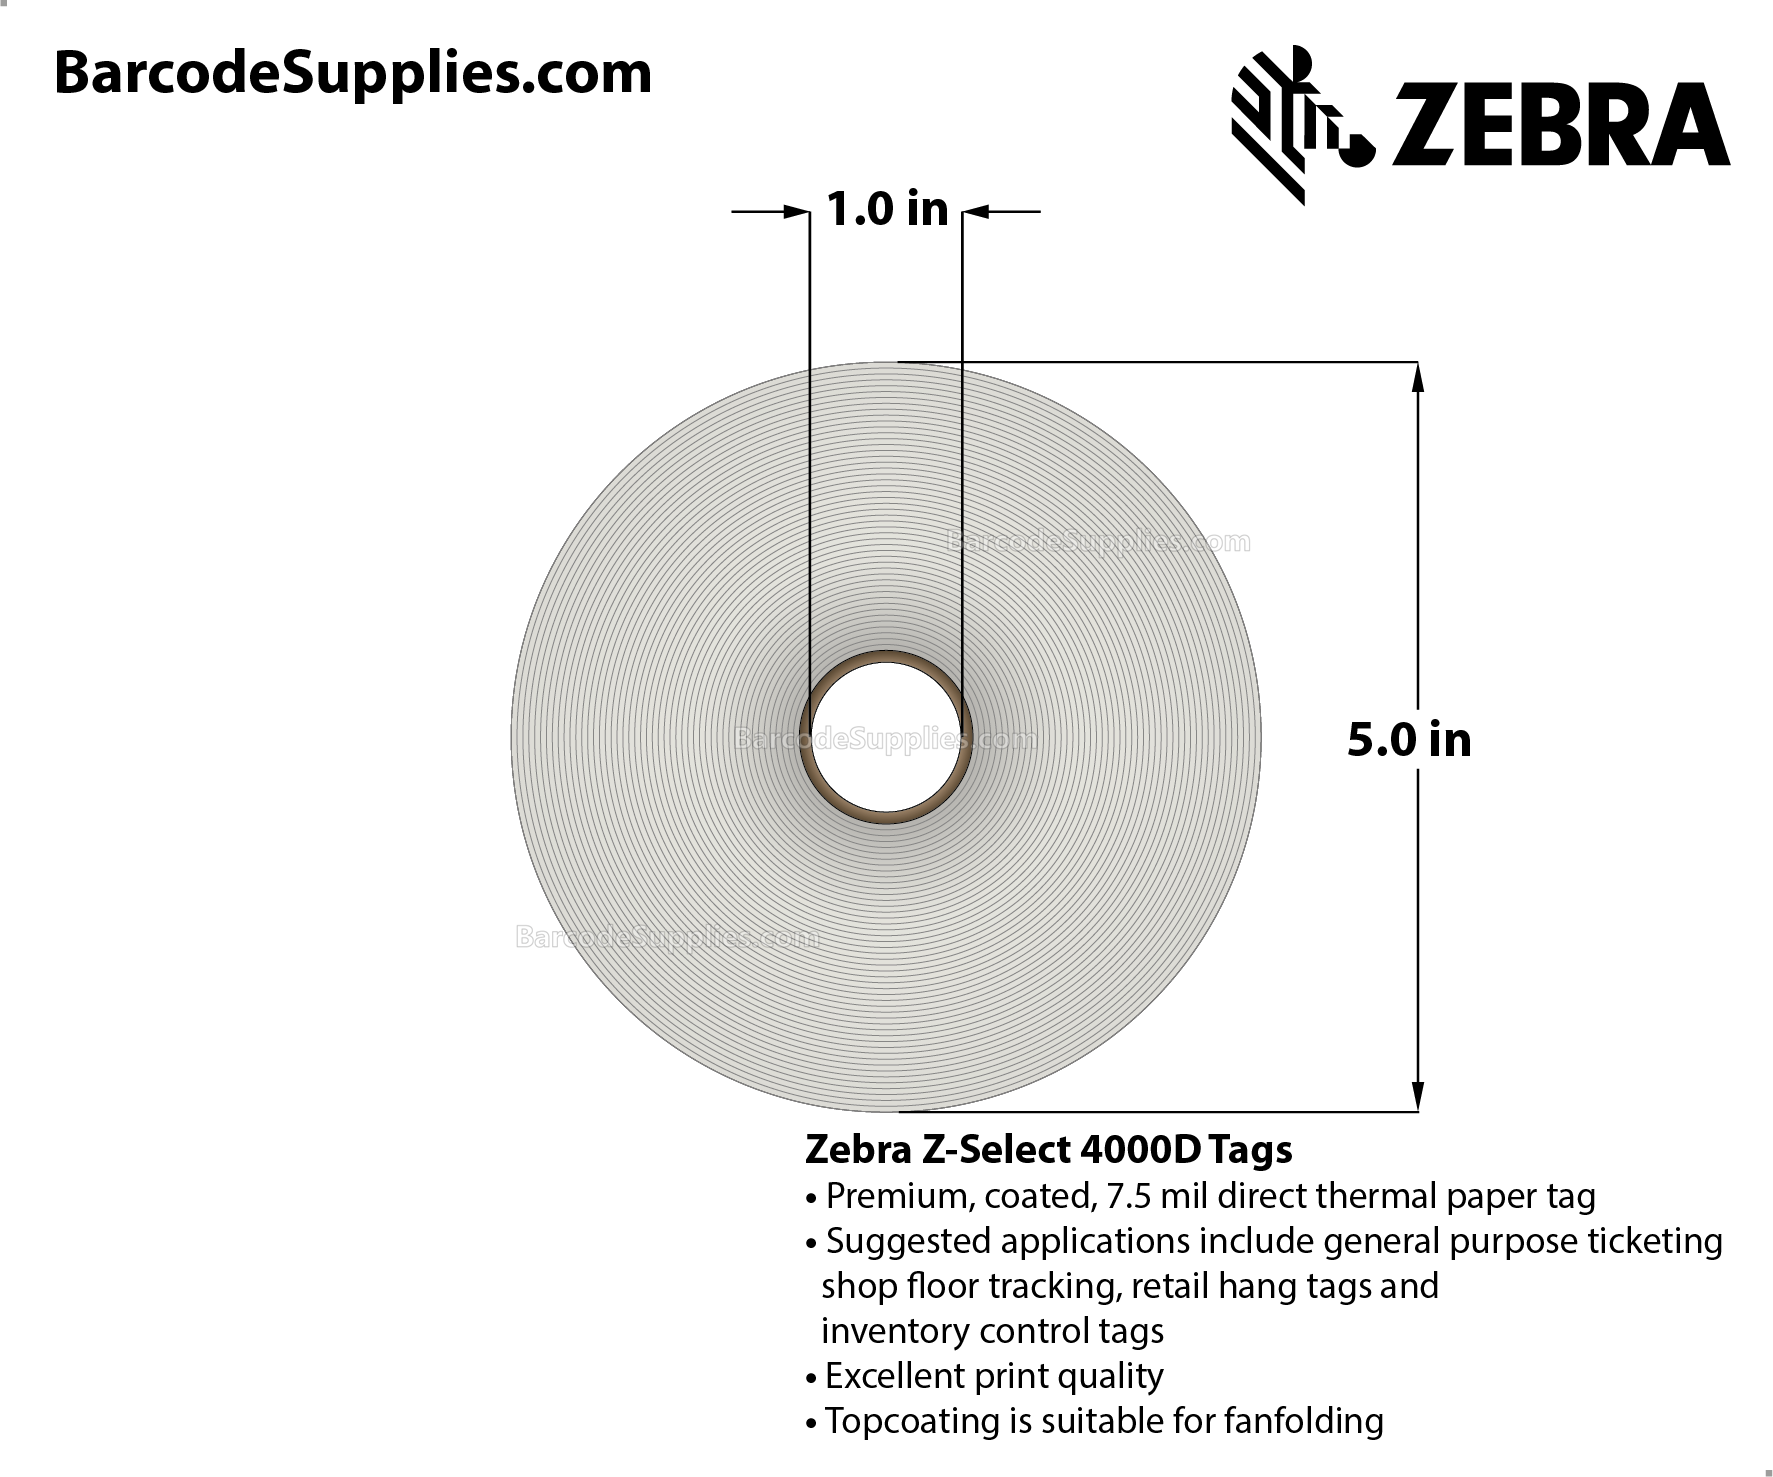 2.25 x 1.37 Direct Thermal White Z-Select 4000D 7 mil Tag Tags With No Adhesive - Contains sensing notch and stringhole - Perforated - 1600 Tags Per Roll - Carton Of 6 Rolls - 9600 Tags Total - MPN: 10010054